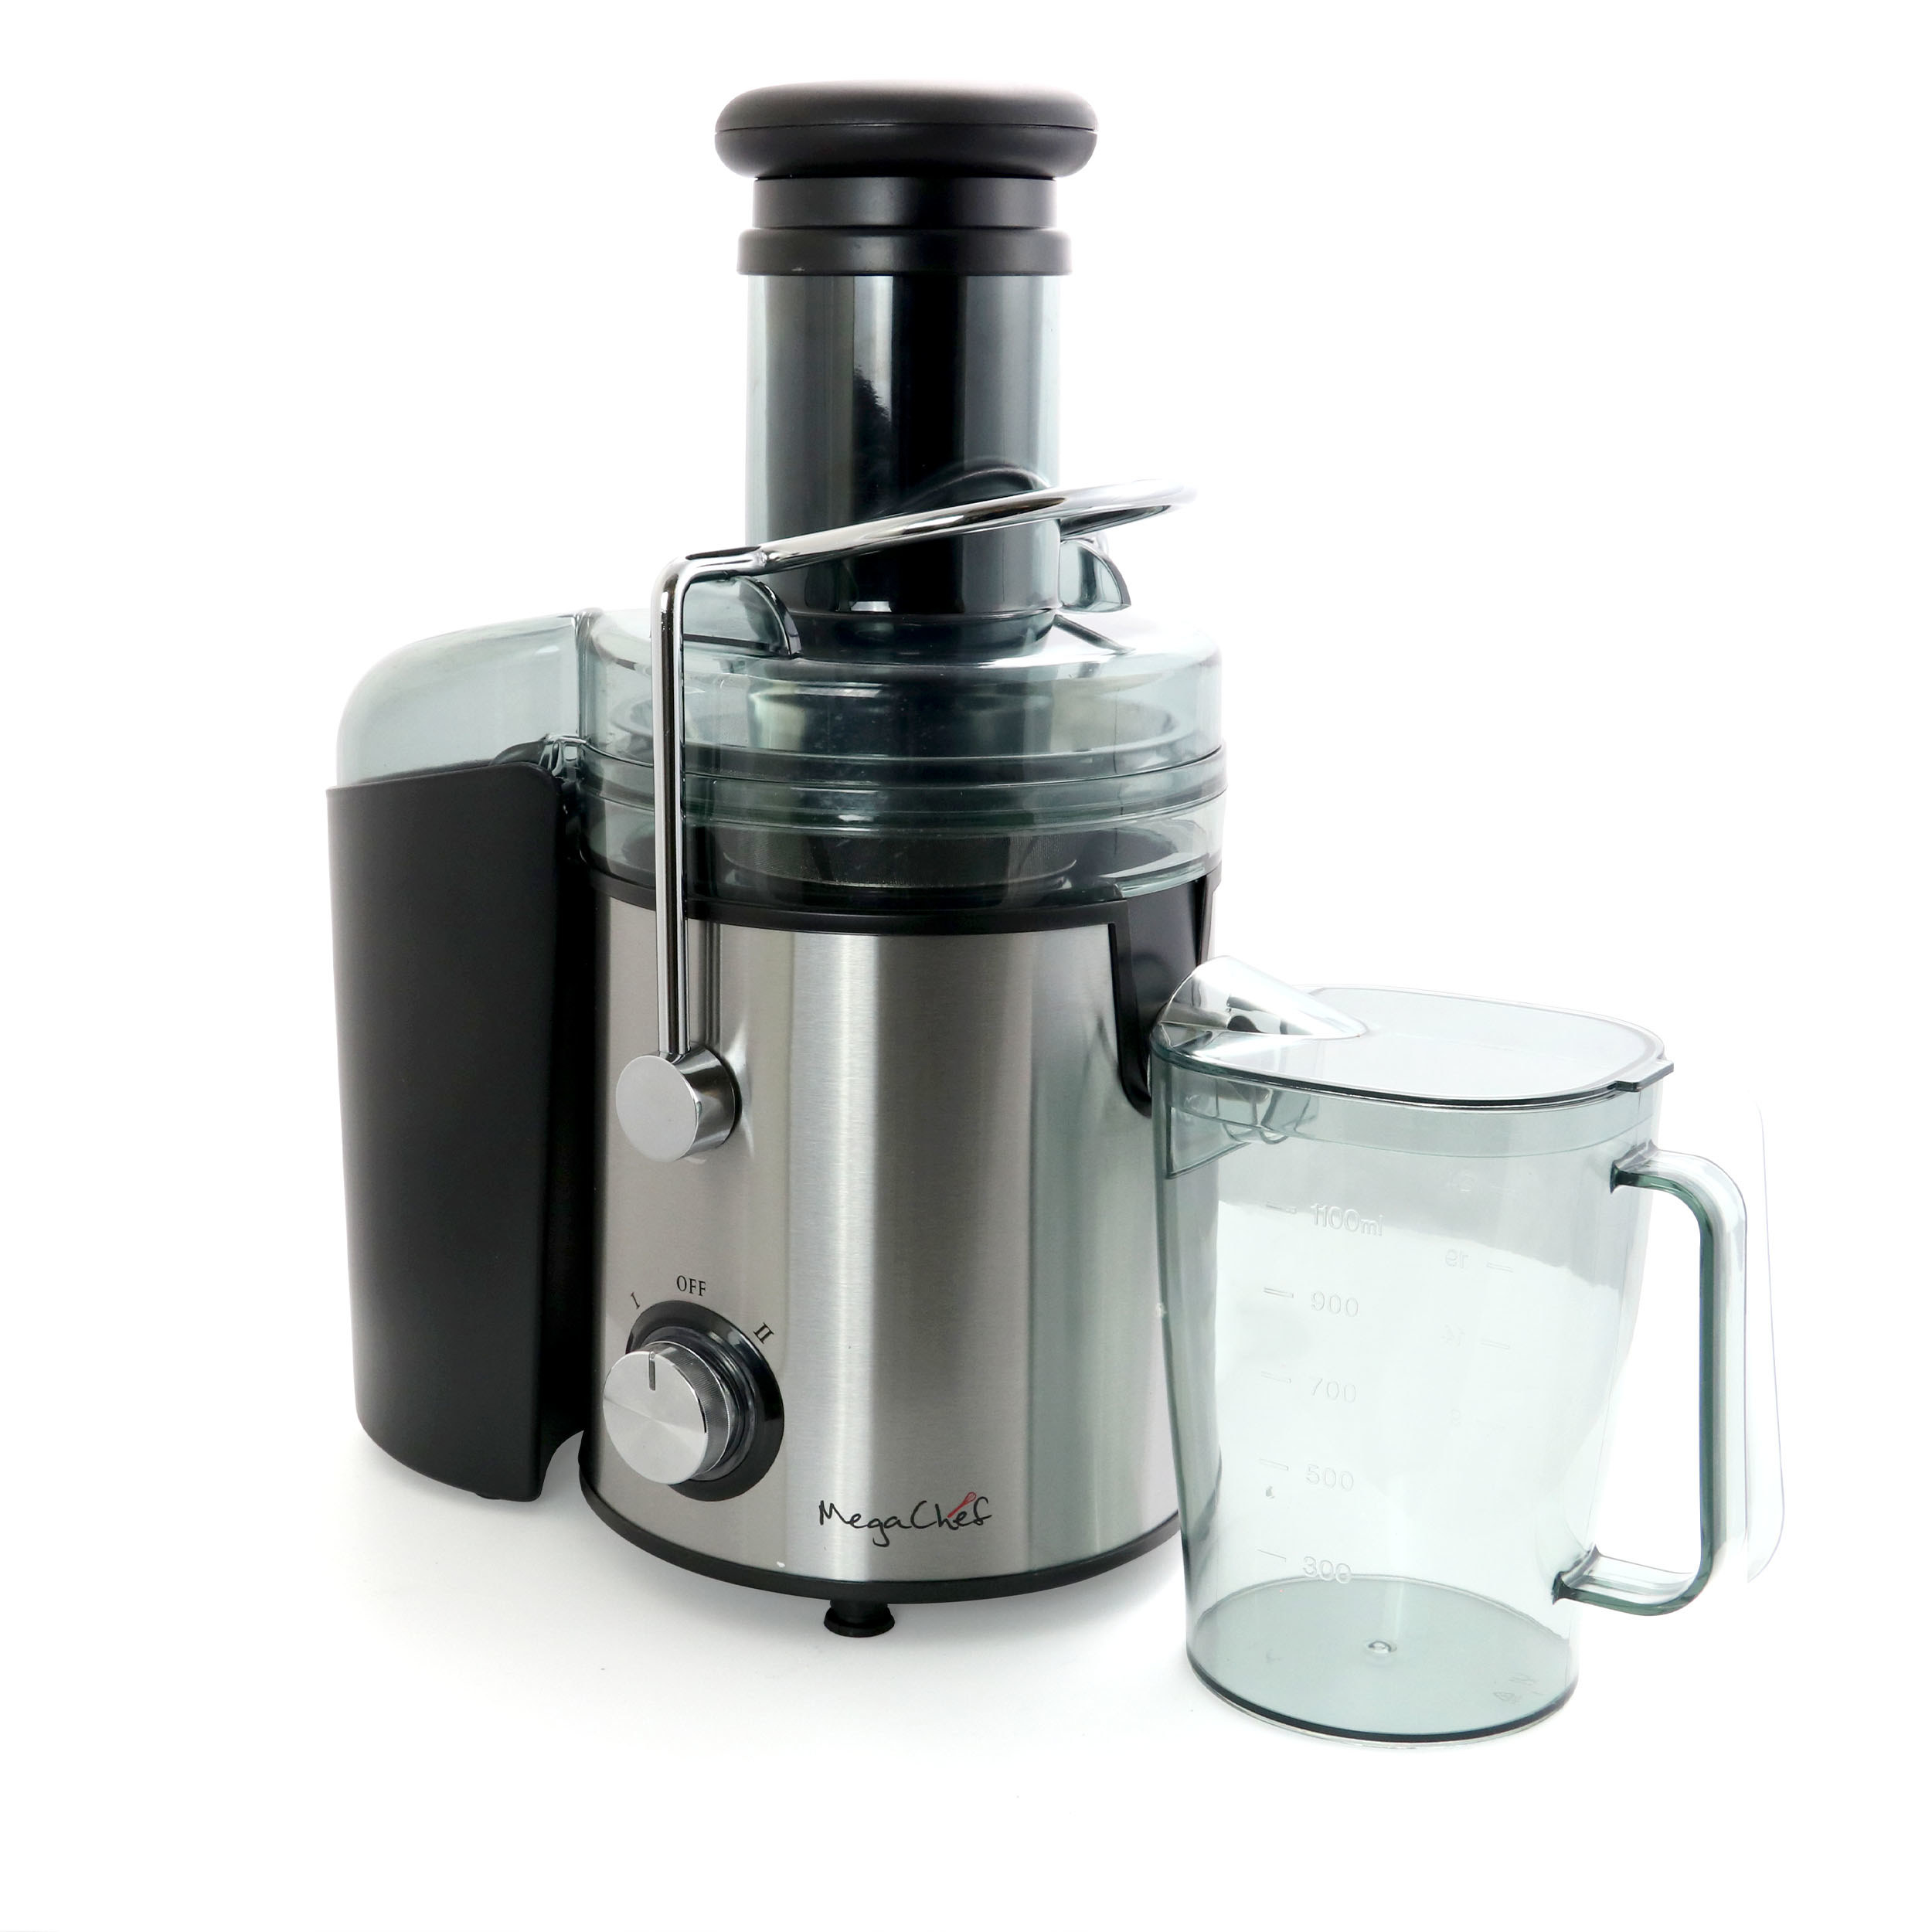 The dual-speed juicer